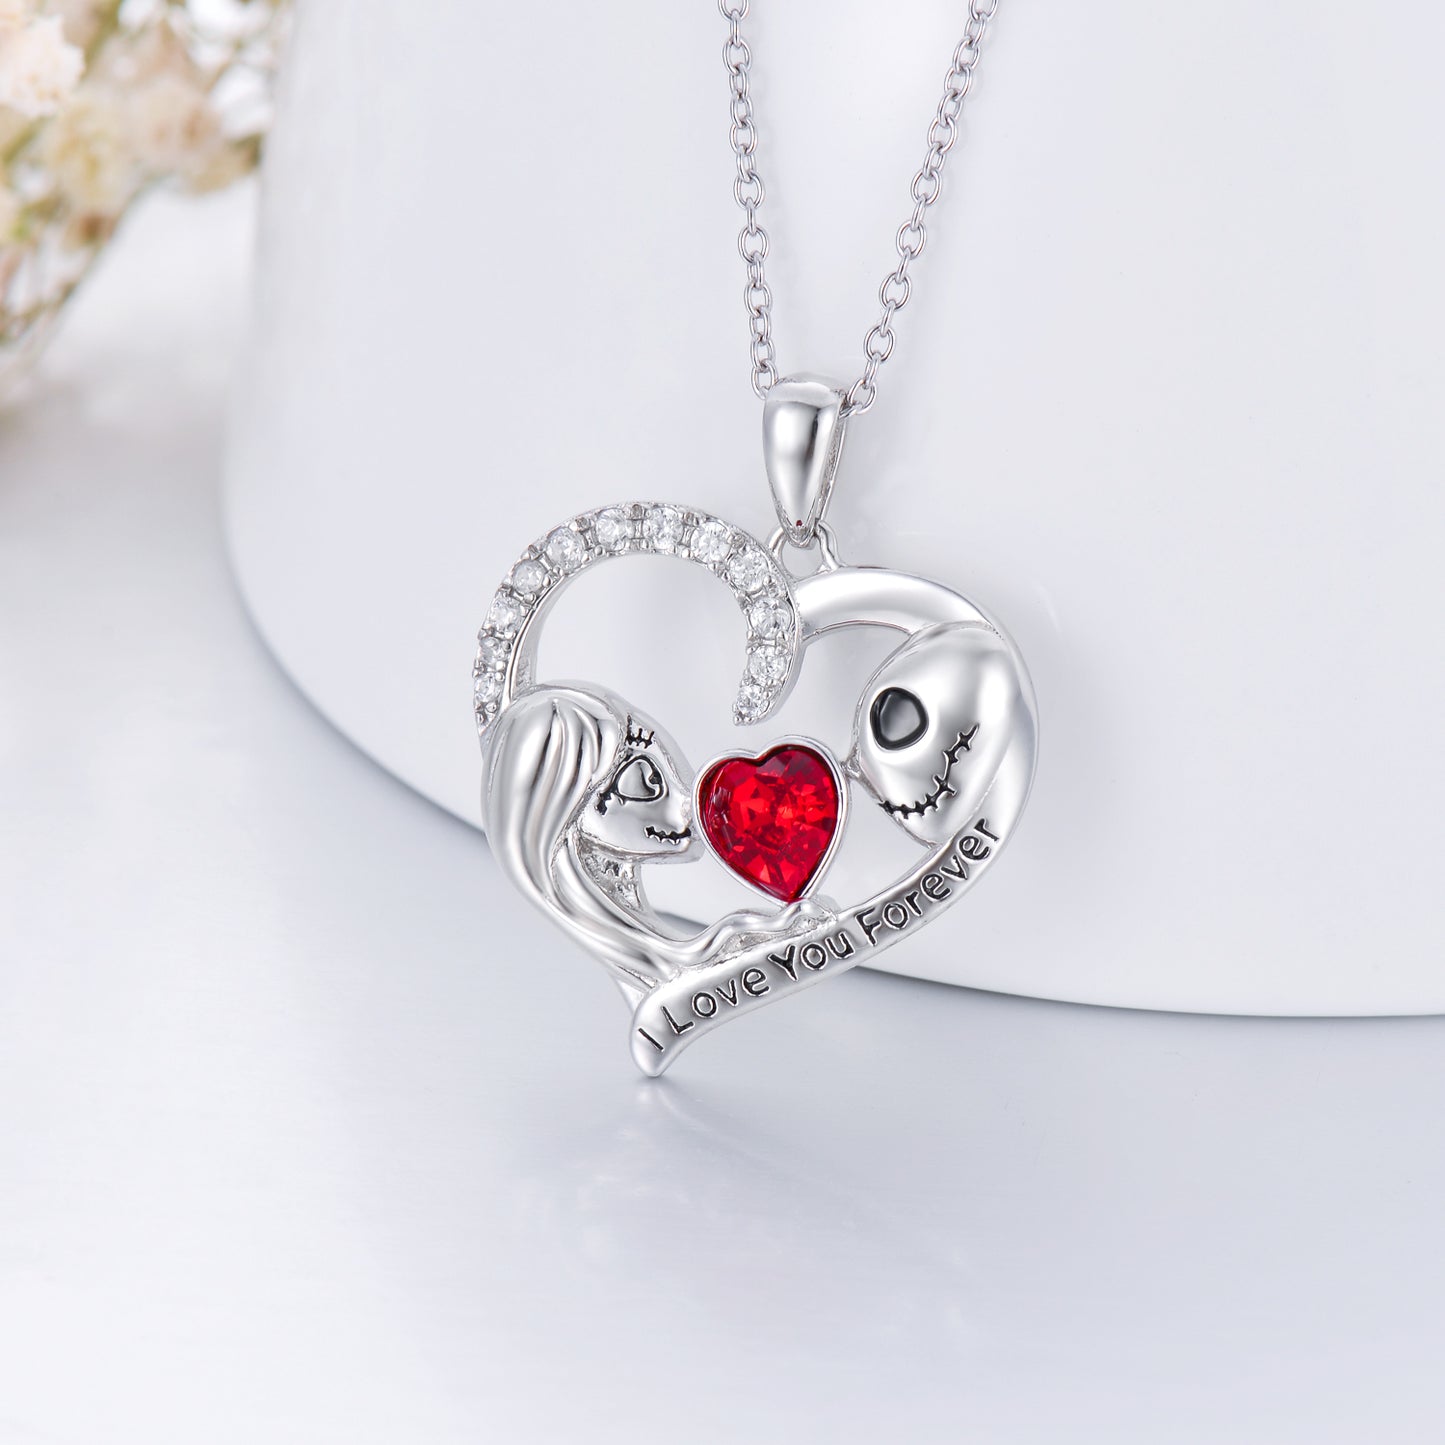 Nightmare Before Christmas Necklace Sterling Silver I Love You Forever Jack Skellington and Sally Love Heart Pendant Necklace